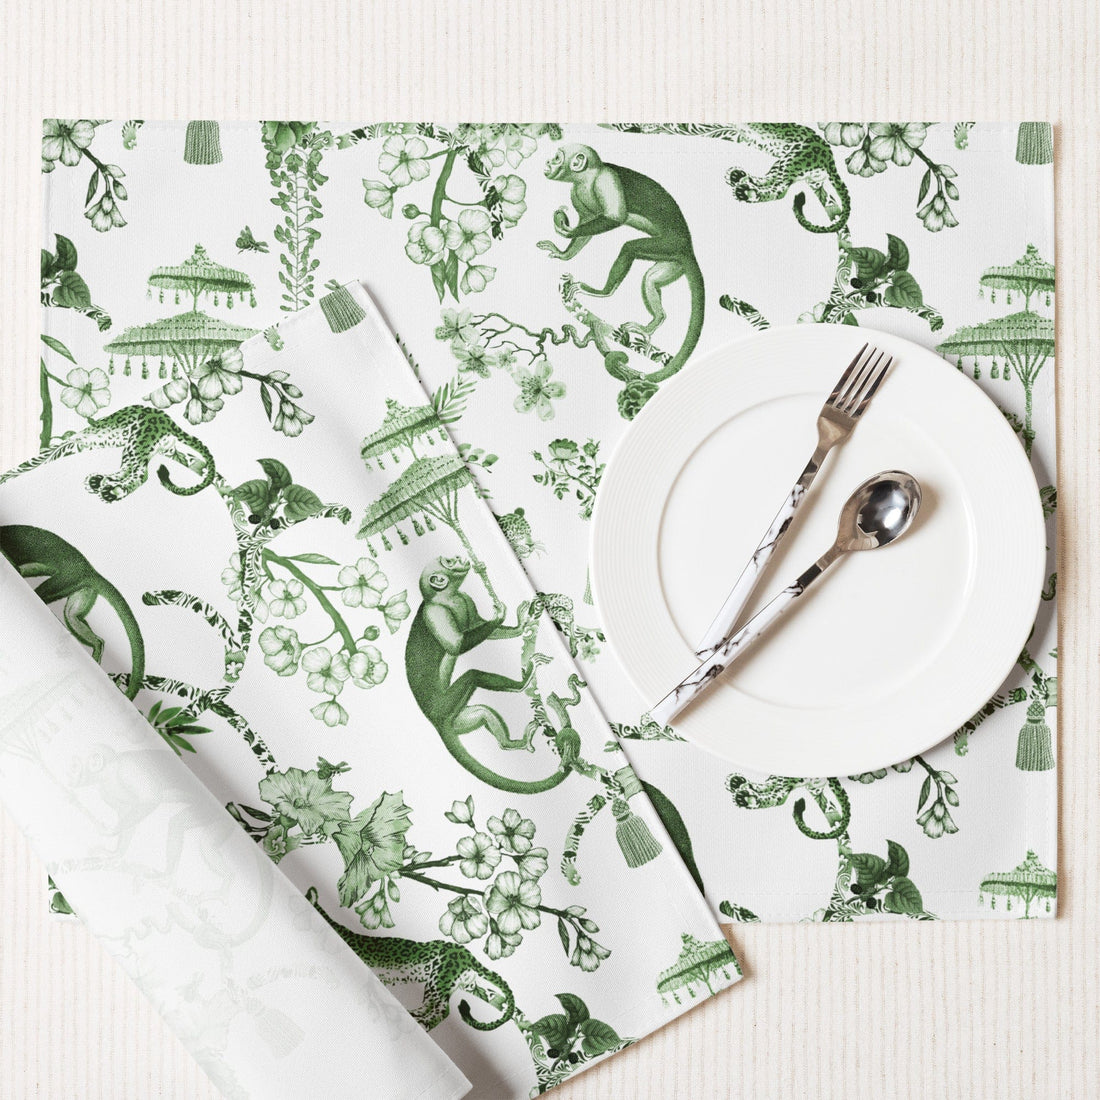 Kate McEnroe New York Set of 4 Chinoiserie Placemats, Floral Green, White Chinoiserie Jungle Table Linen, Country Farmhouse Botanical Toile Table DecorPlacemats8608700_17484